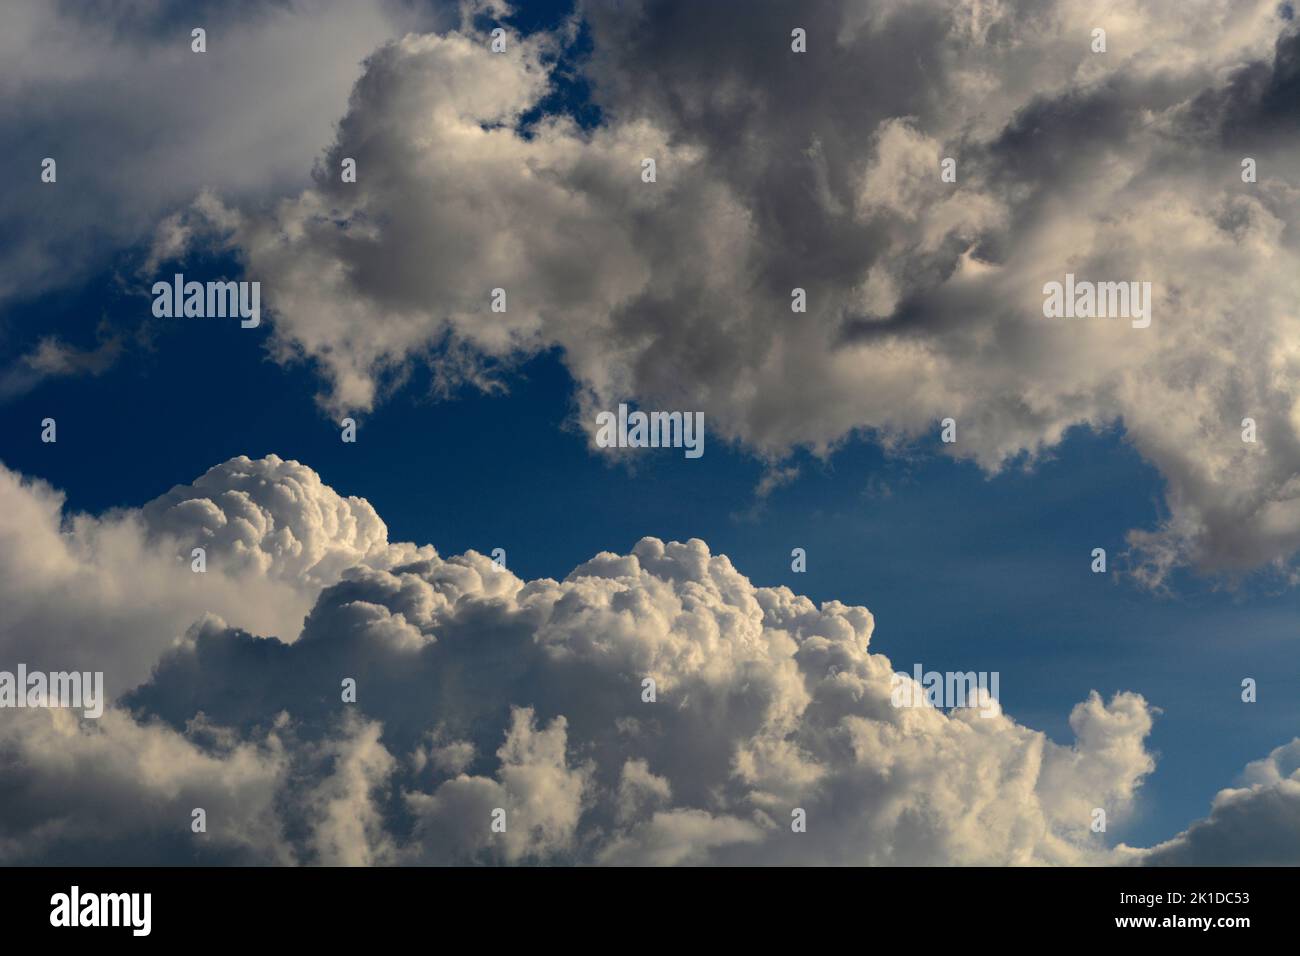 Cumulus clouds fill the sky over the American Southwest near Santa Fe, New Mexico. Stock Photo